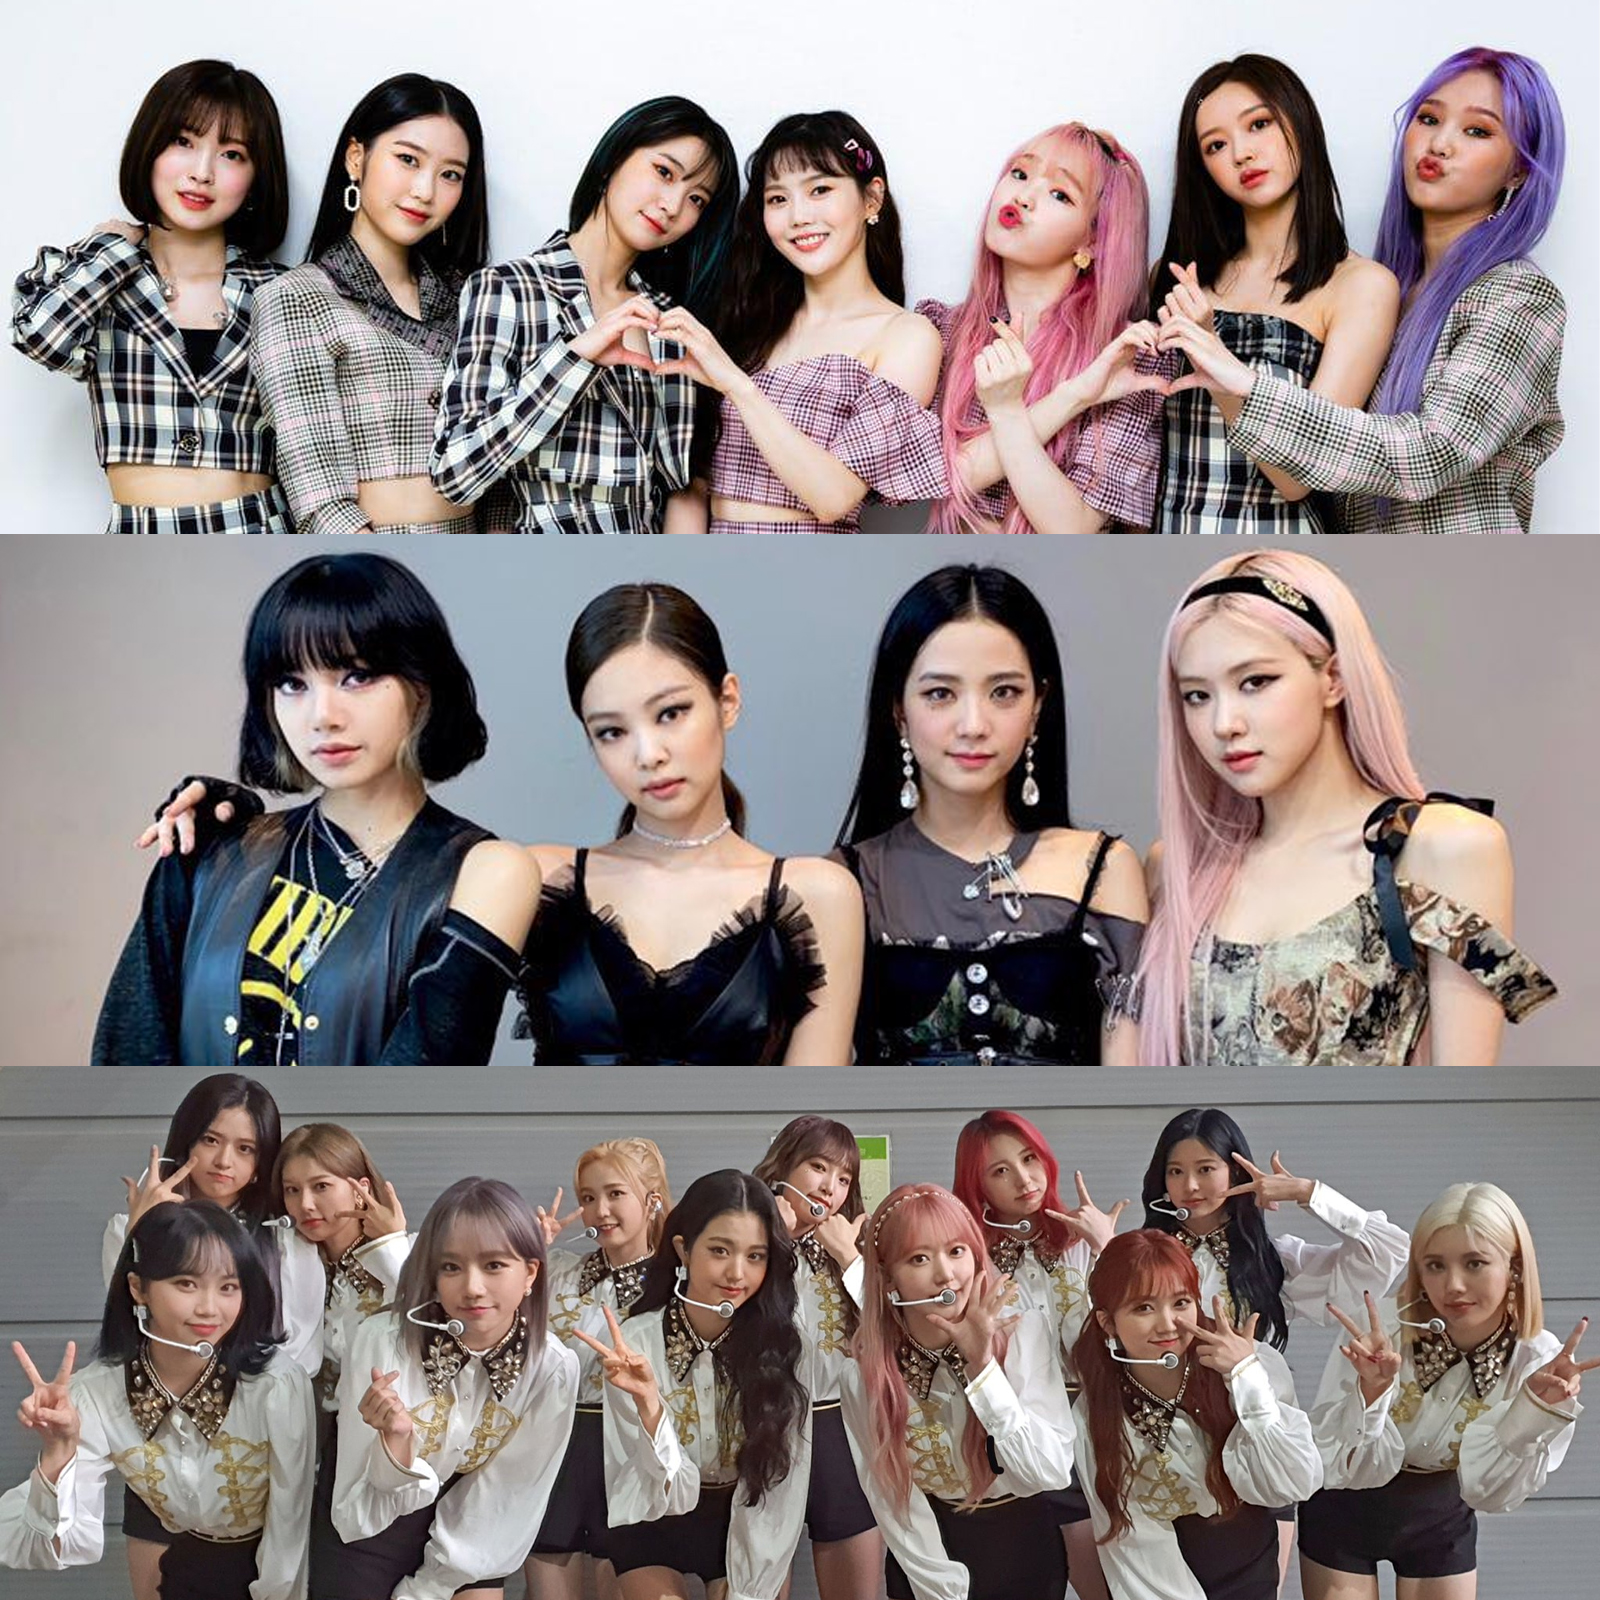 5-b-side-songs-from-k-pop-girl-groups-with-the-most-likes-on-melon-in-2020-2